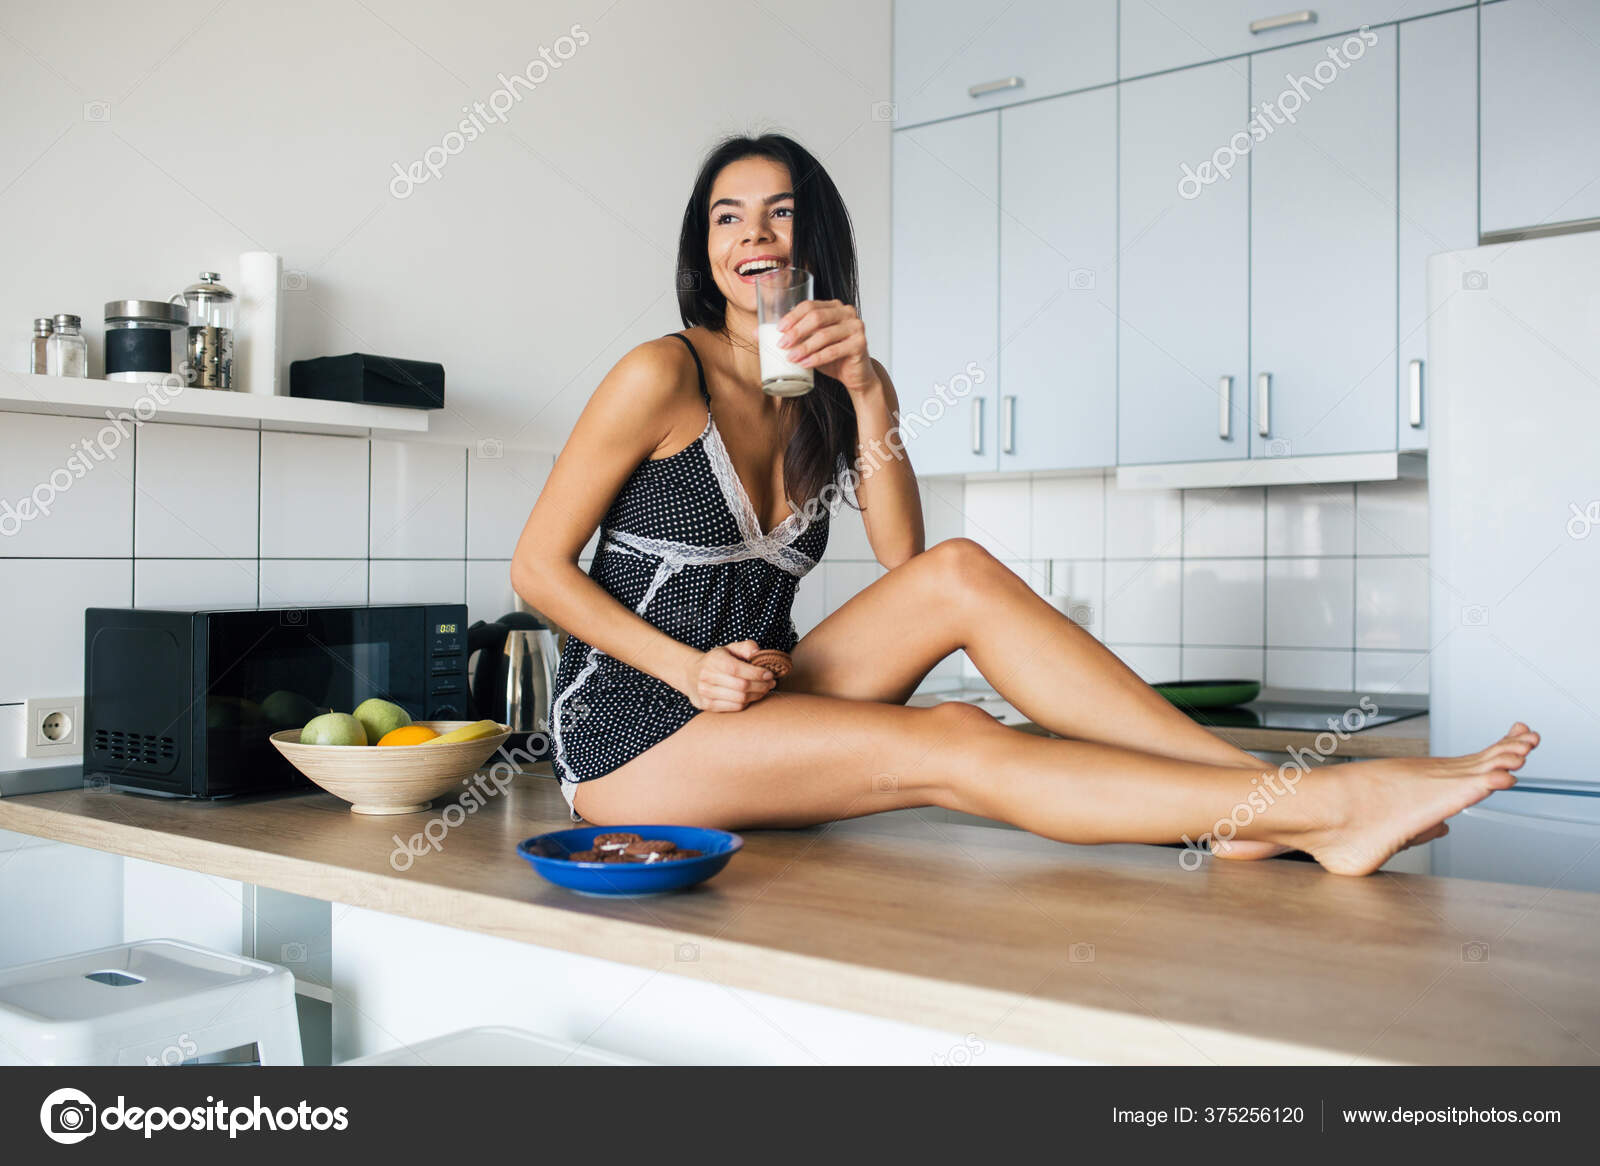 Sexy legs cooking in the kitchen